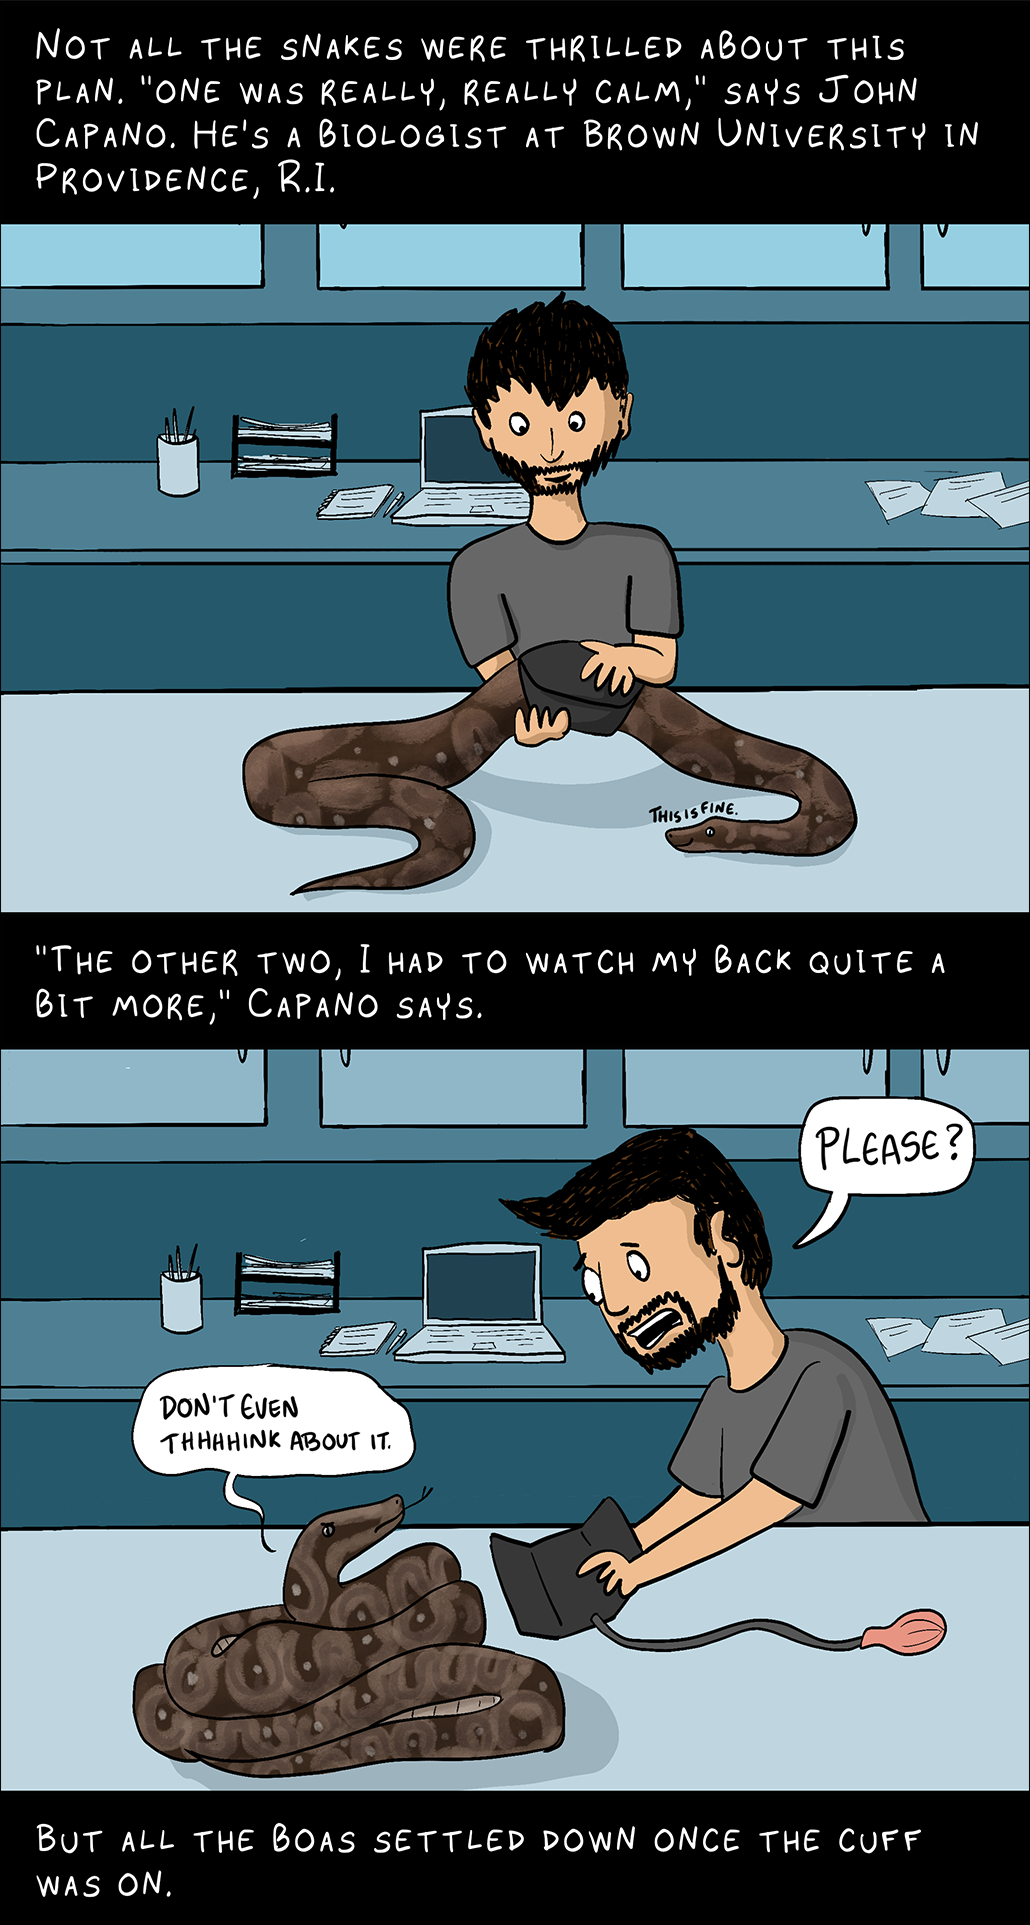 Panel 4. Top text: Not all snakes were enthusiastic about this plan.  “One of them was very, very calm,” says John Capano.  He is a biologist at Brown University in Providence, Rhode Island.  An image of John, the man seen in panel 2, handcuffs a snake resting quietly on a table.  The snake says, 